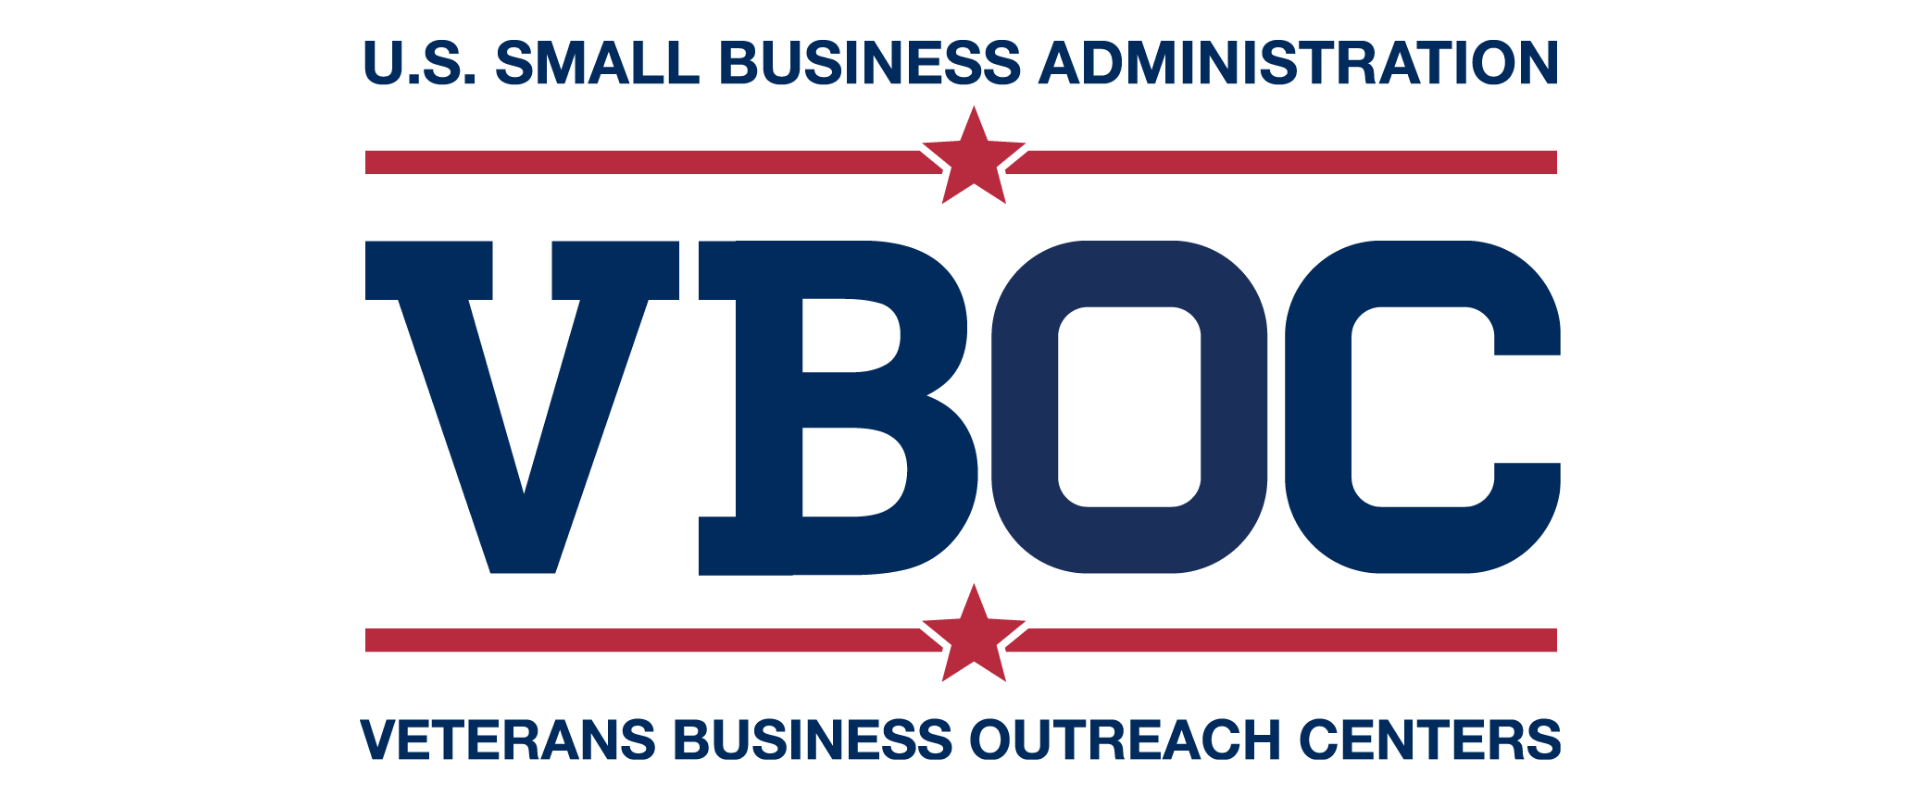 US Small Business Administration, Veterans Business Outreach Centers